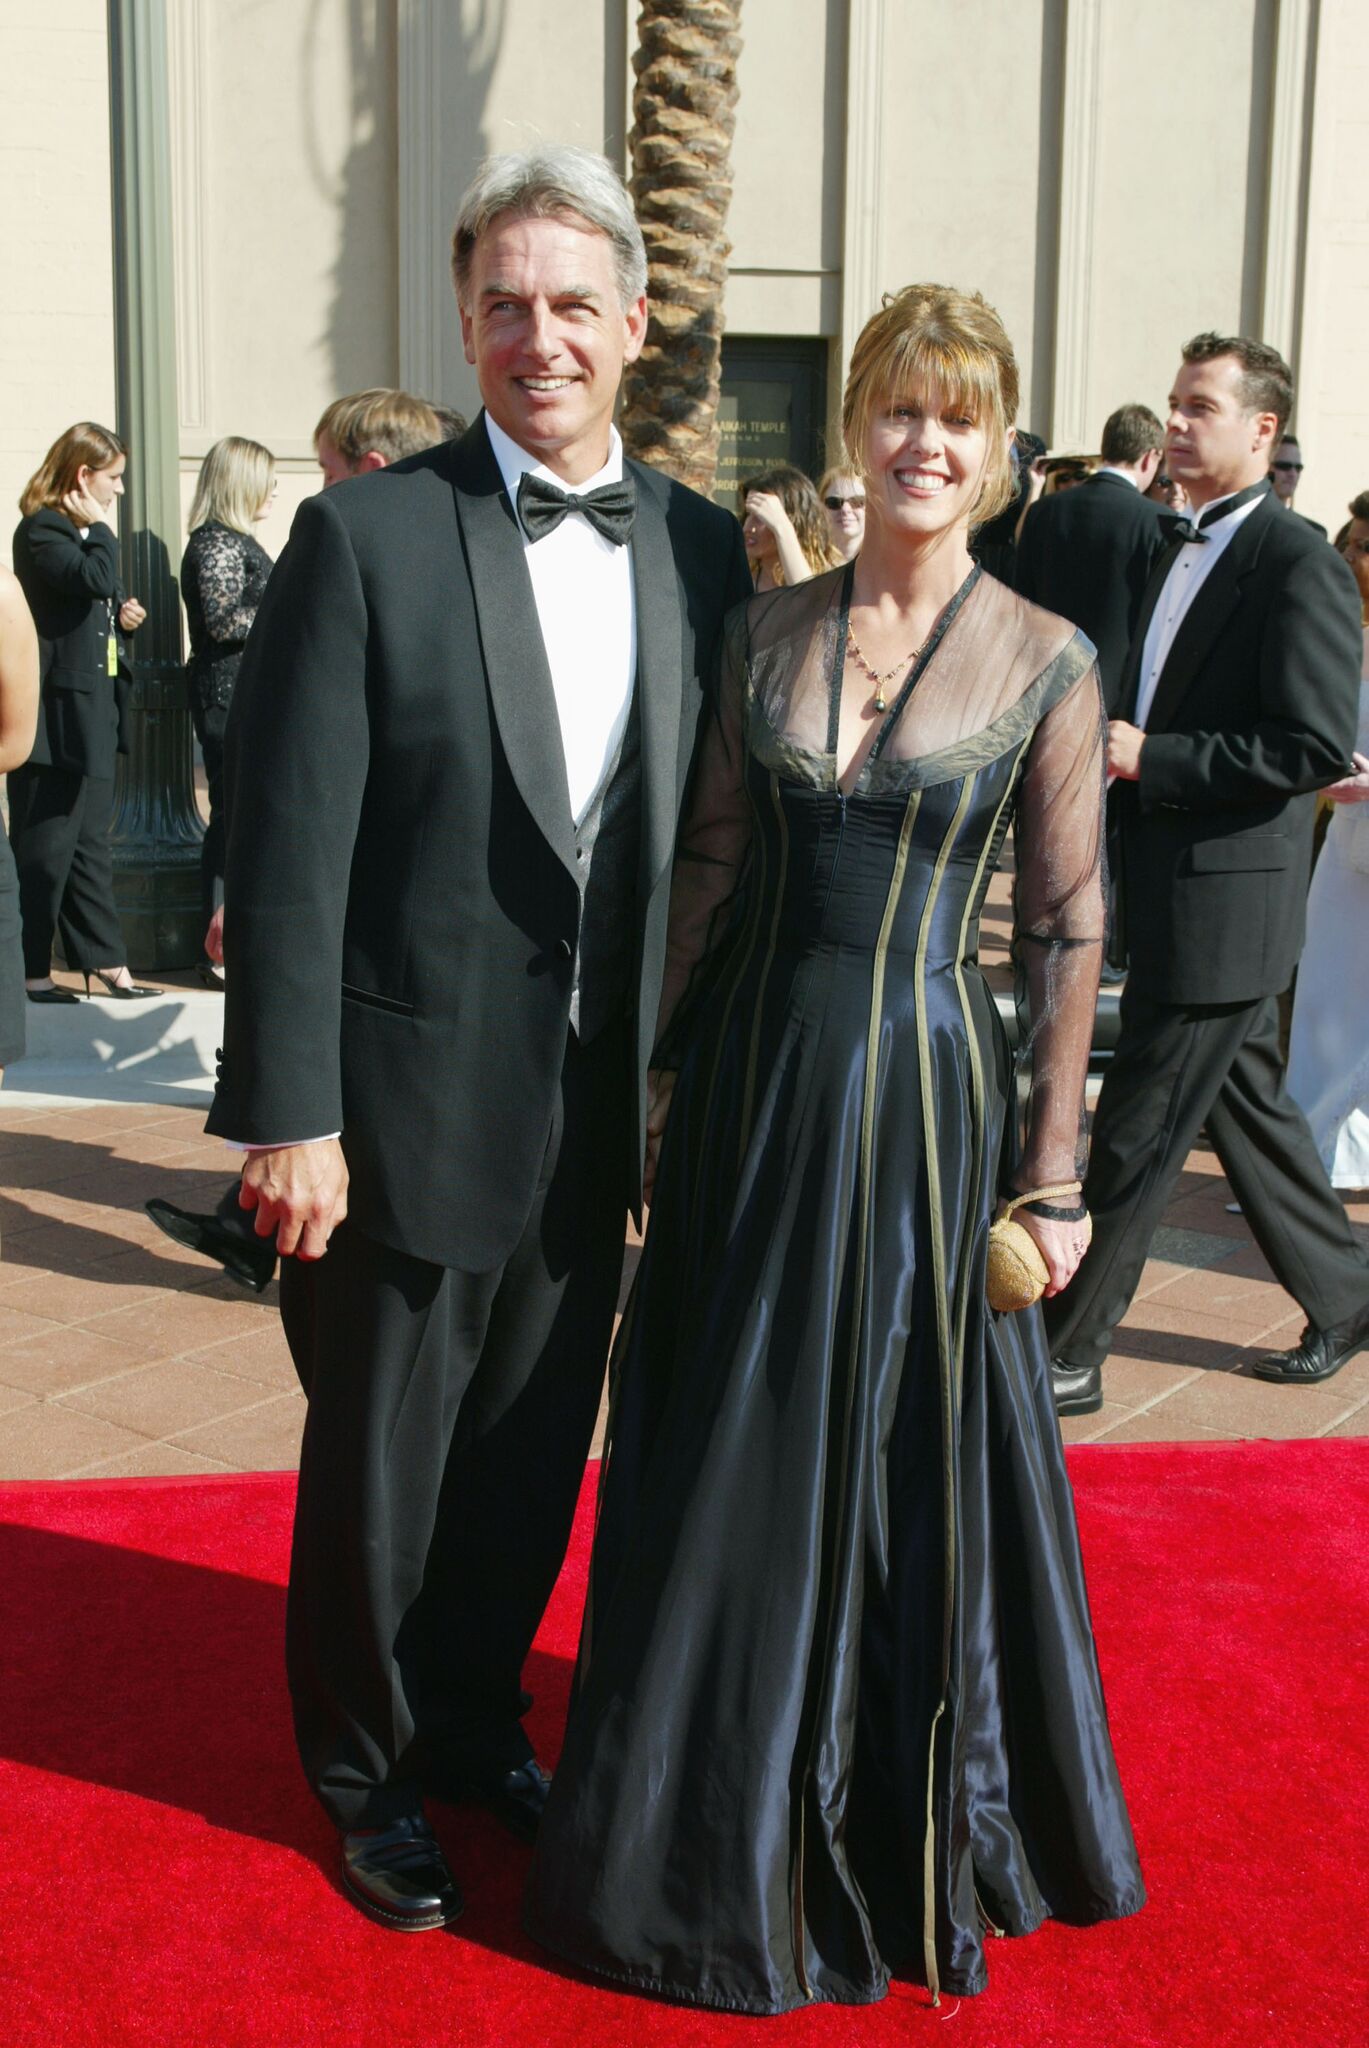 Mark Harmon and Pam Dawber at the 2002 Creative Arts Emmy Awards at the Shrine Auditorium | Getty Images